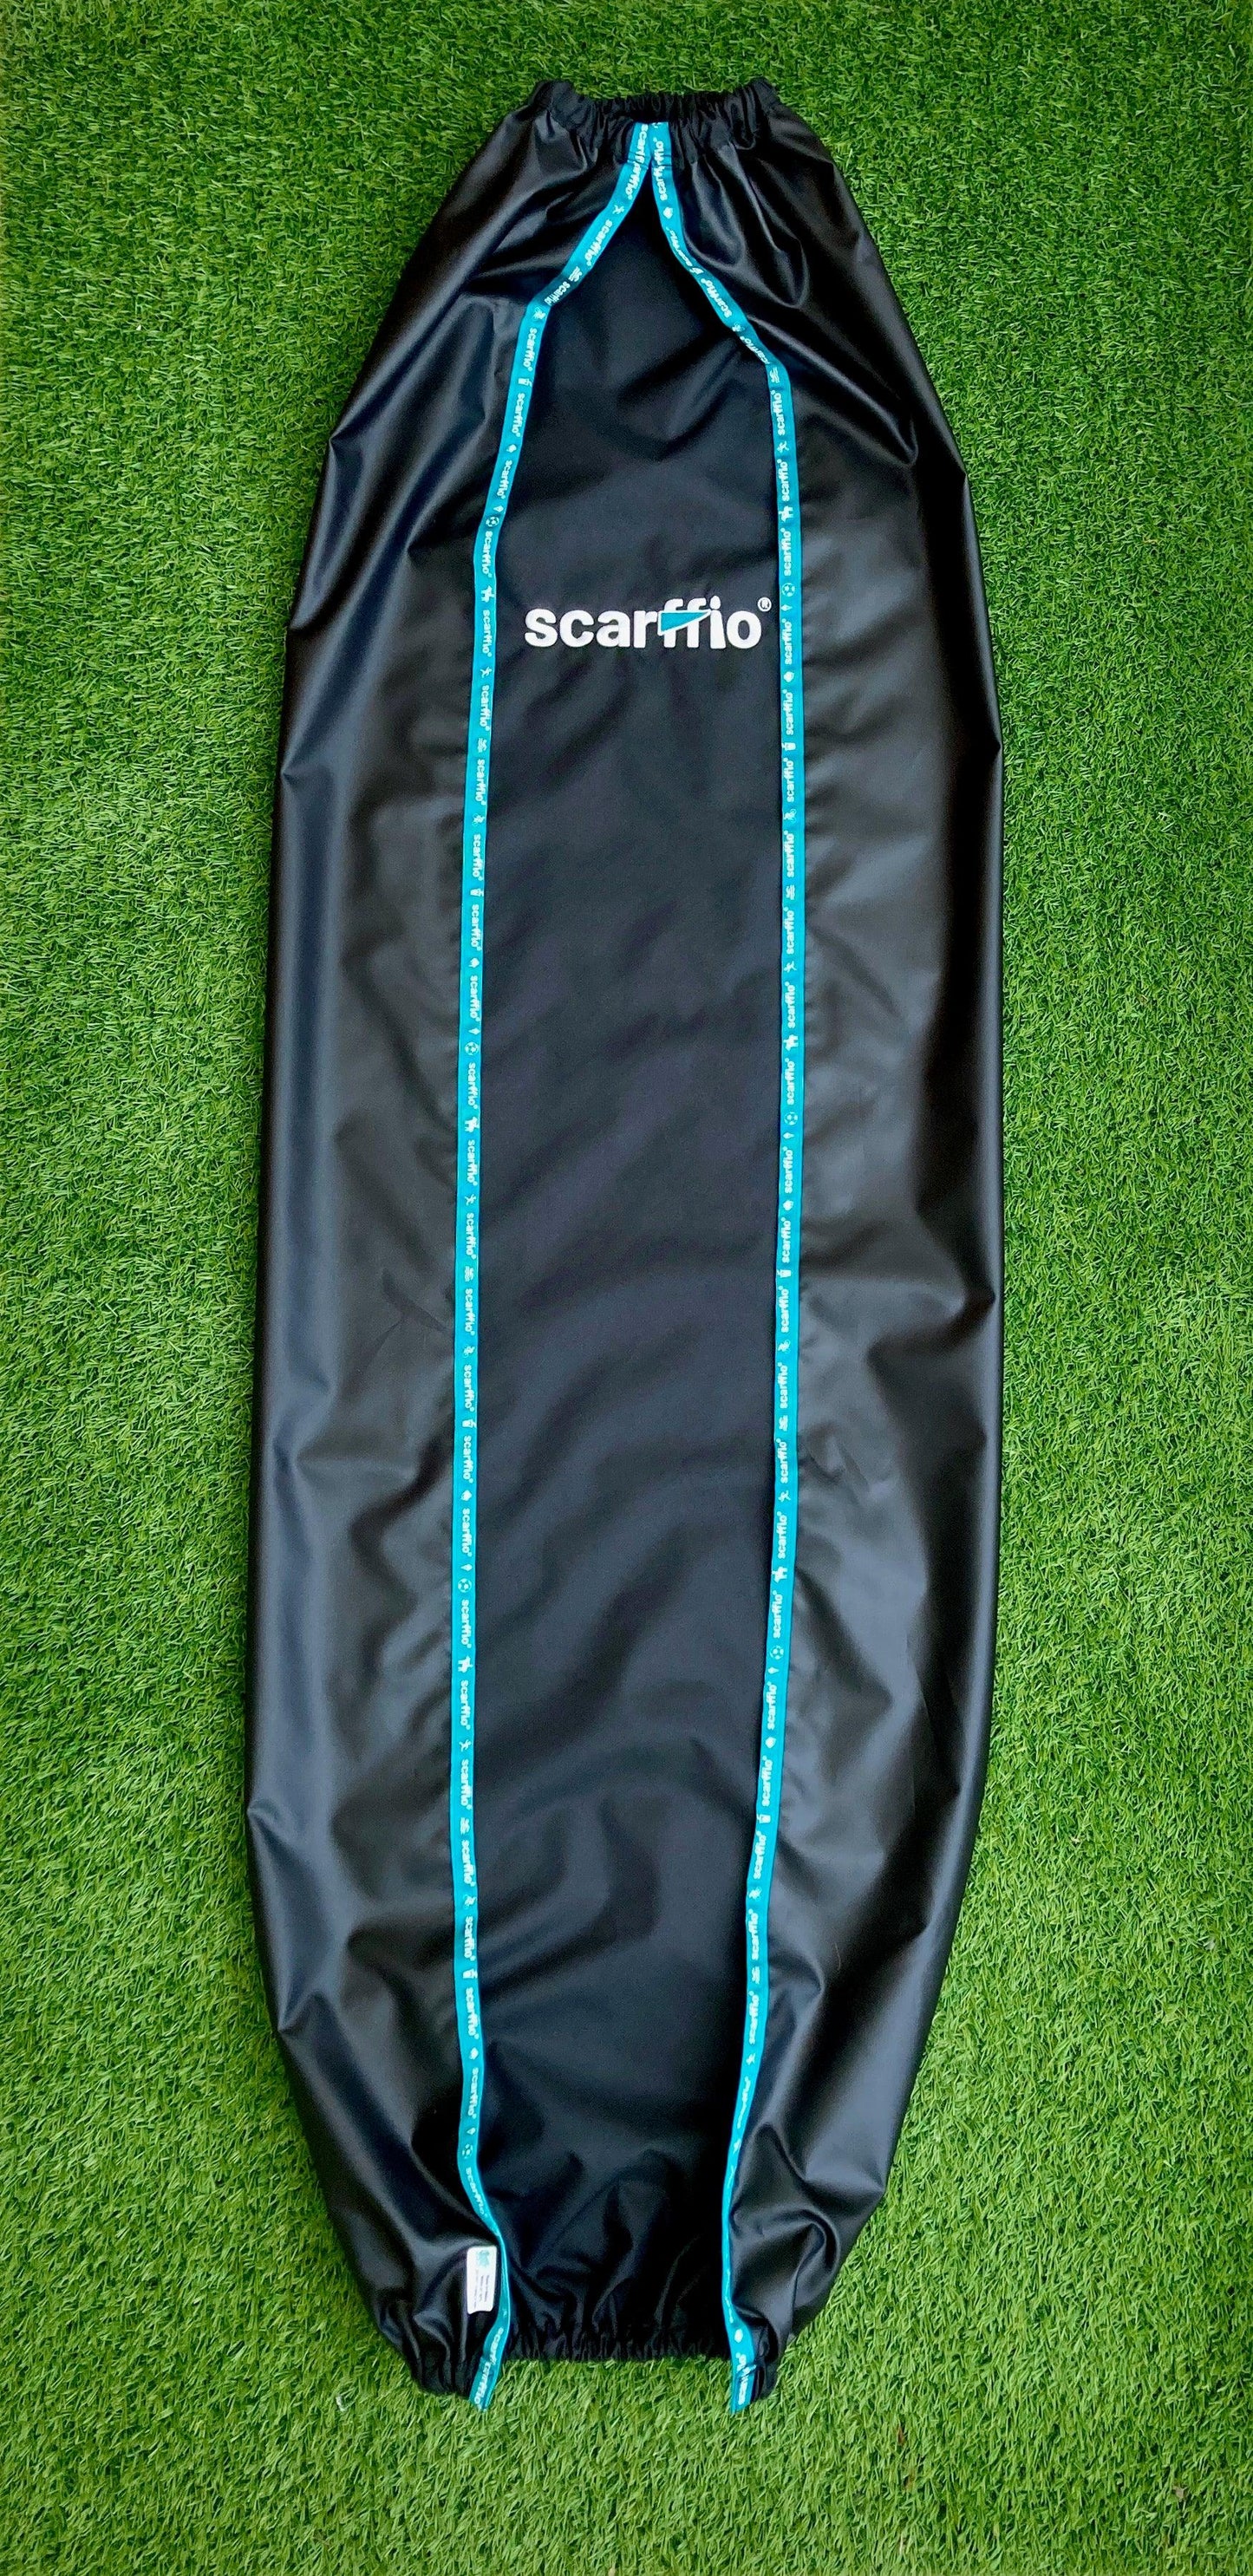 Shows a folded, full size  Custom Jet Black and Wild Teal  scarffio® on a grass background. The folding demonstrates the waterproof coating on the back of the scarffio® and the soft feel fabric on the front . Also shown is  the contrasting Wild Teal embroidered flag and branded edging strip.